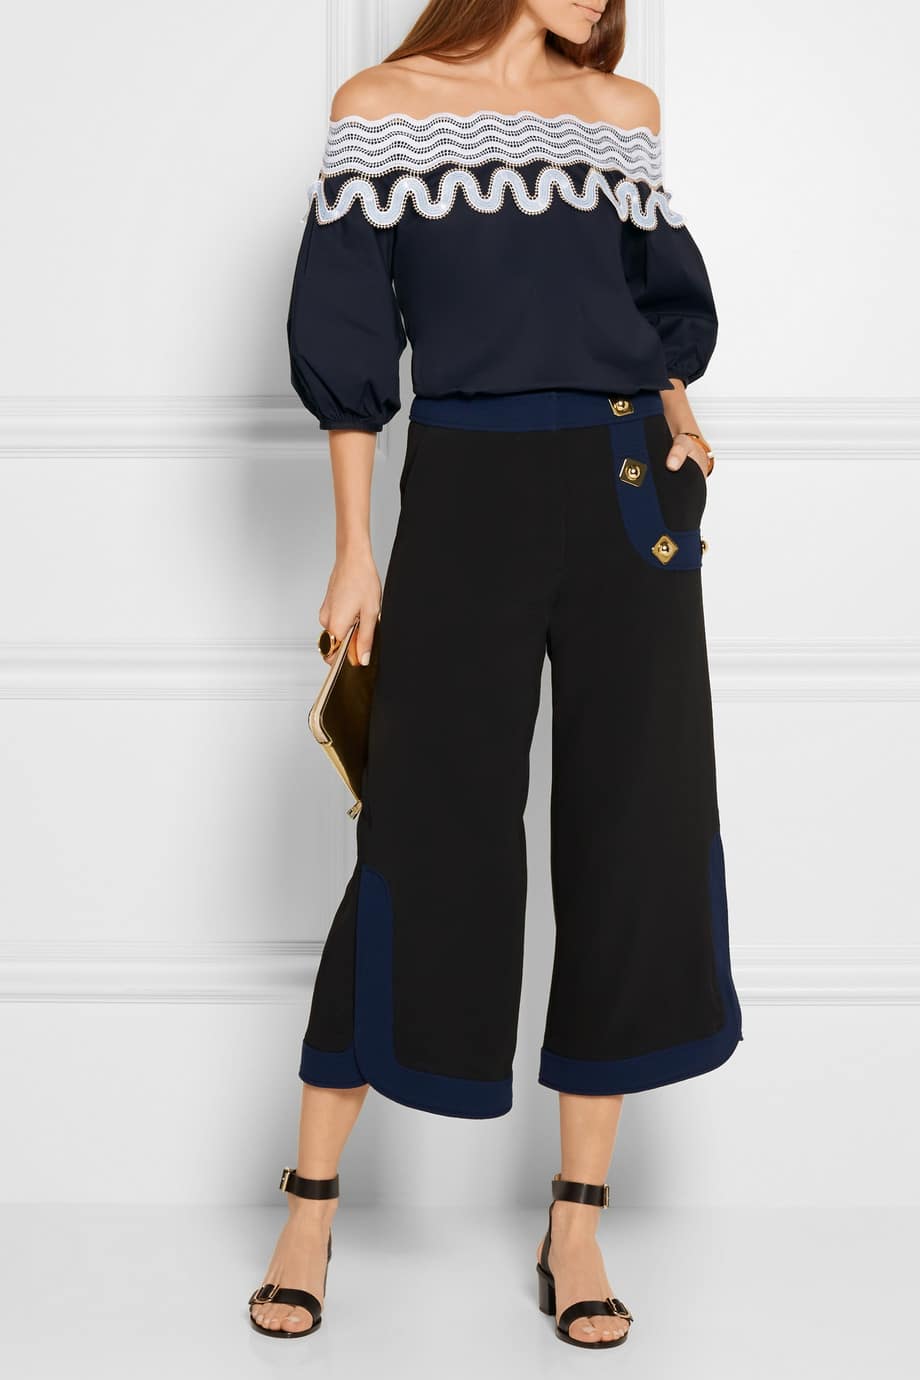 Off the shoulder embroidered Peter Pilotto Top Navy